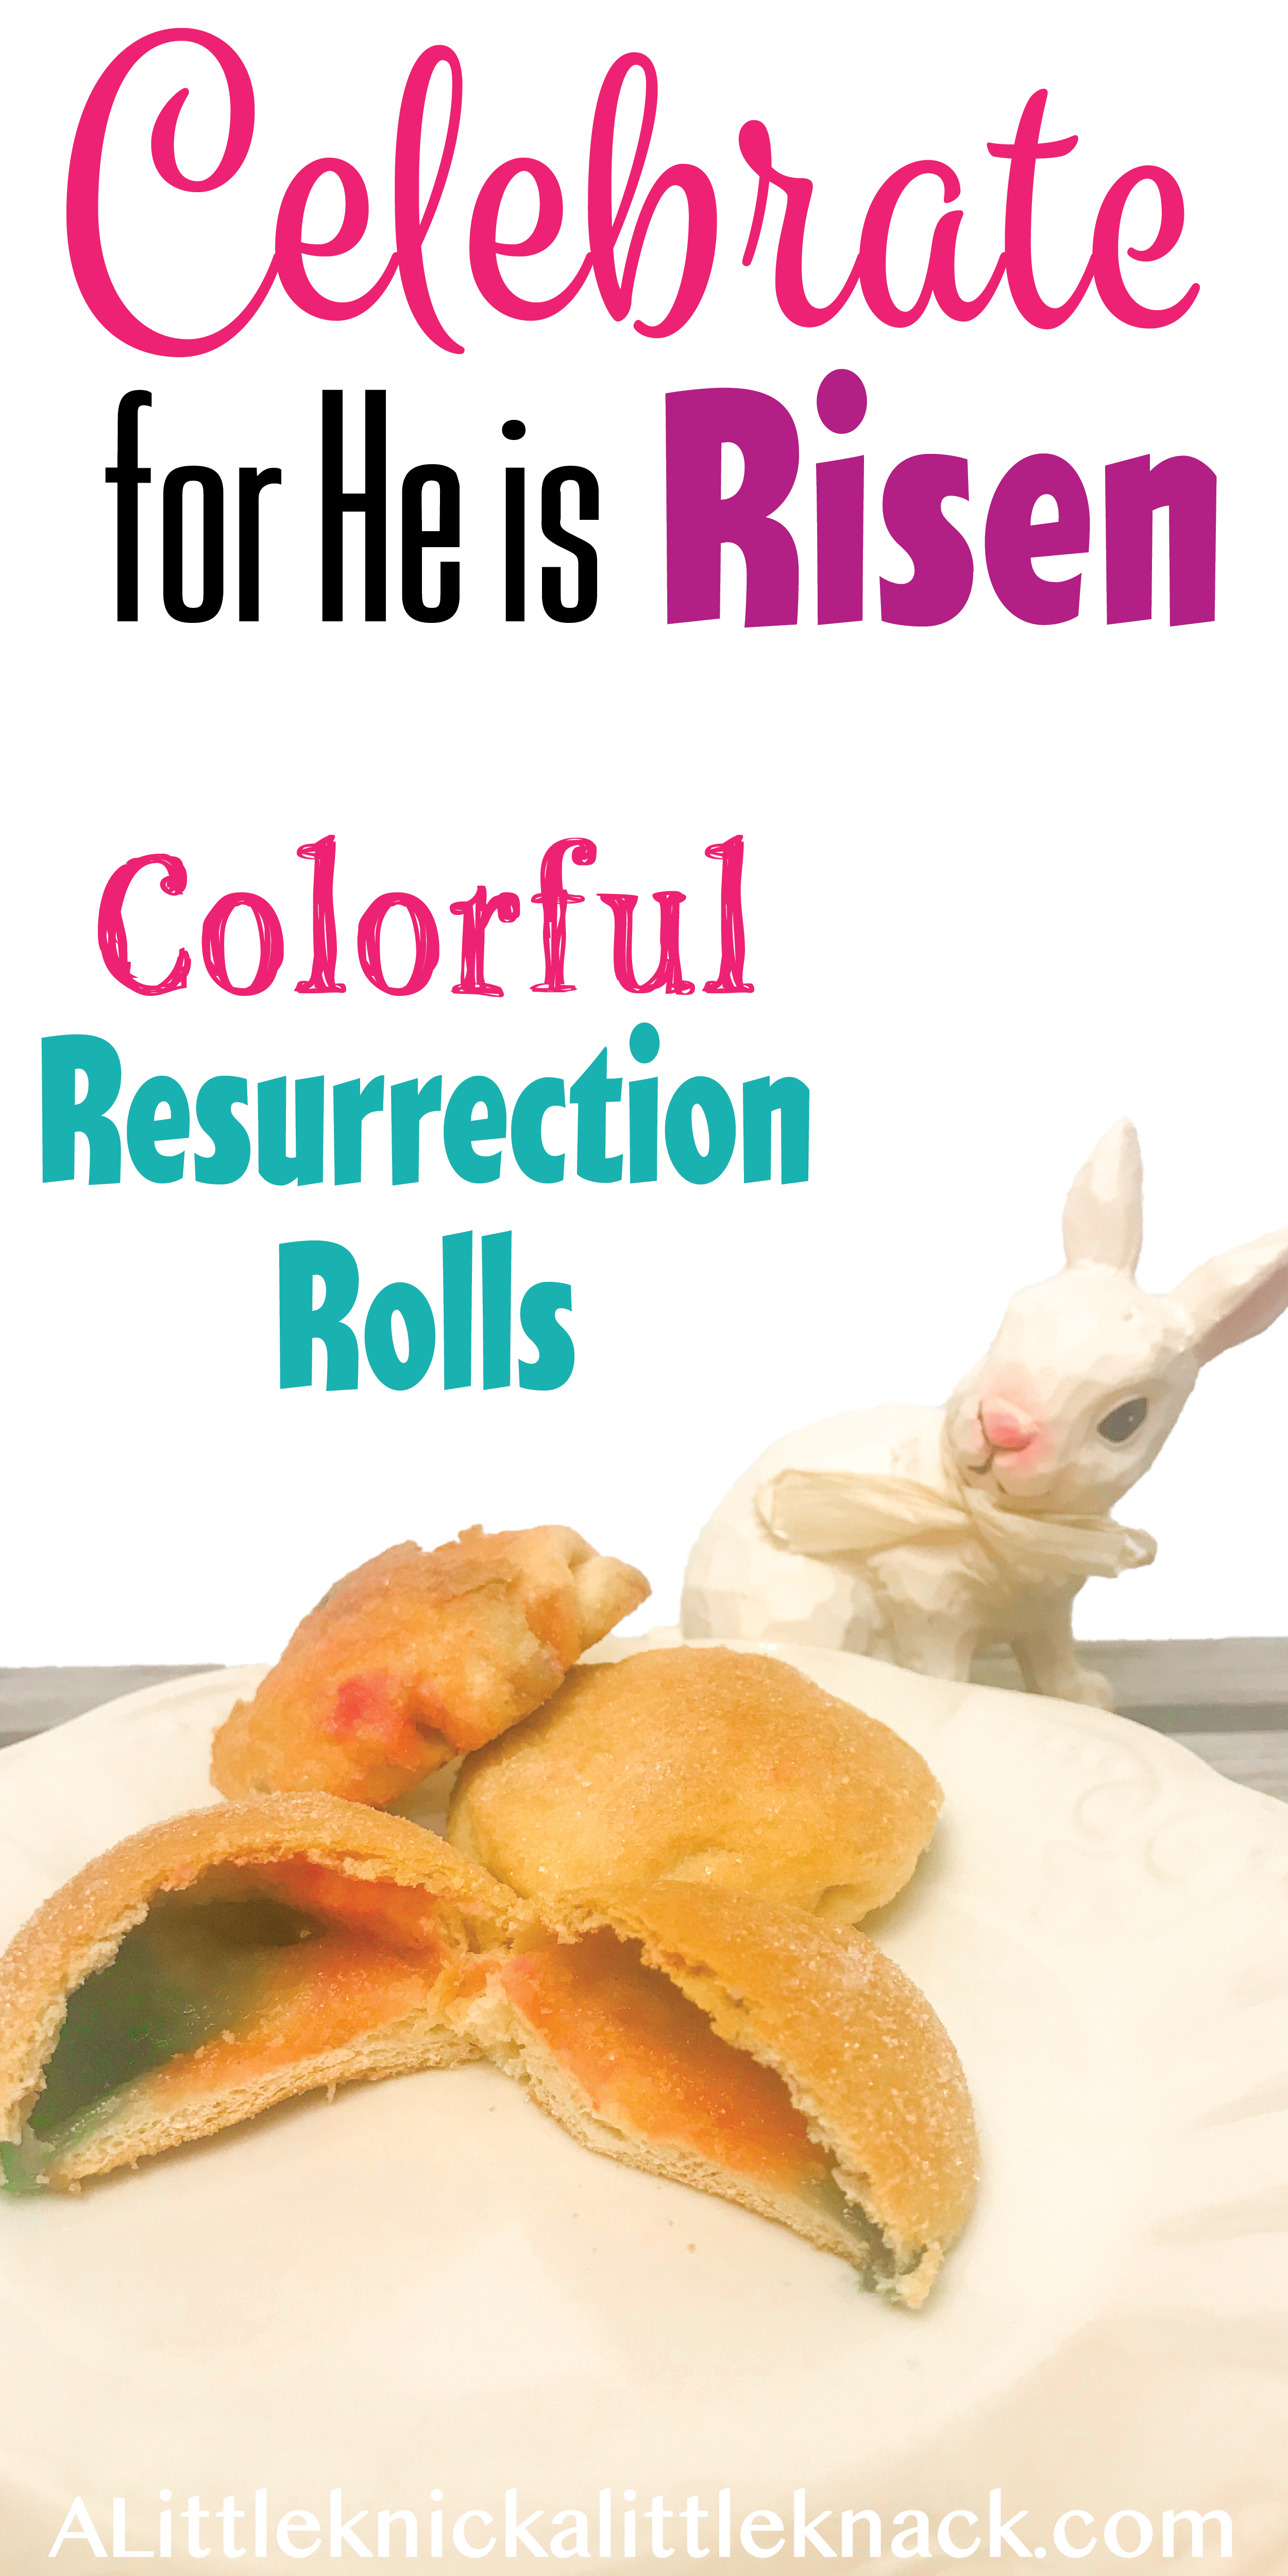 Hollow resurrection rolls with colorful interior on a white platter with a ceramic bunny and text overlay 